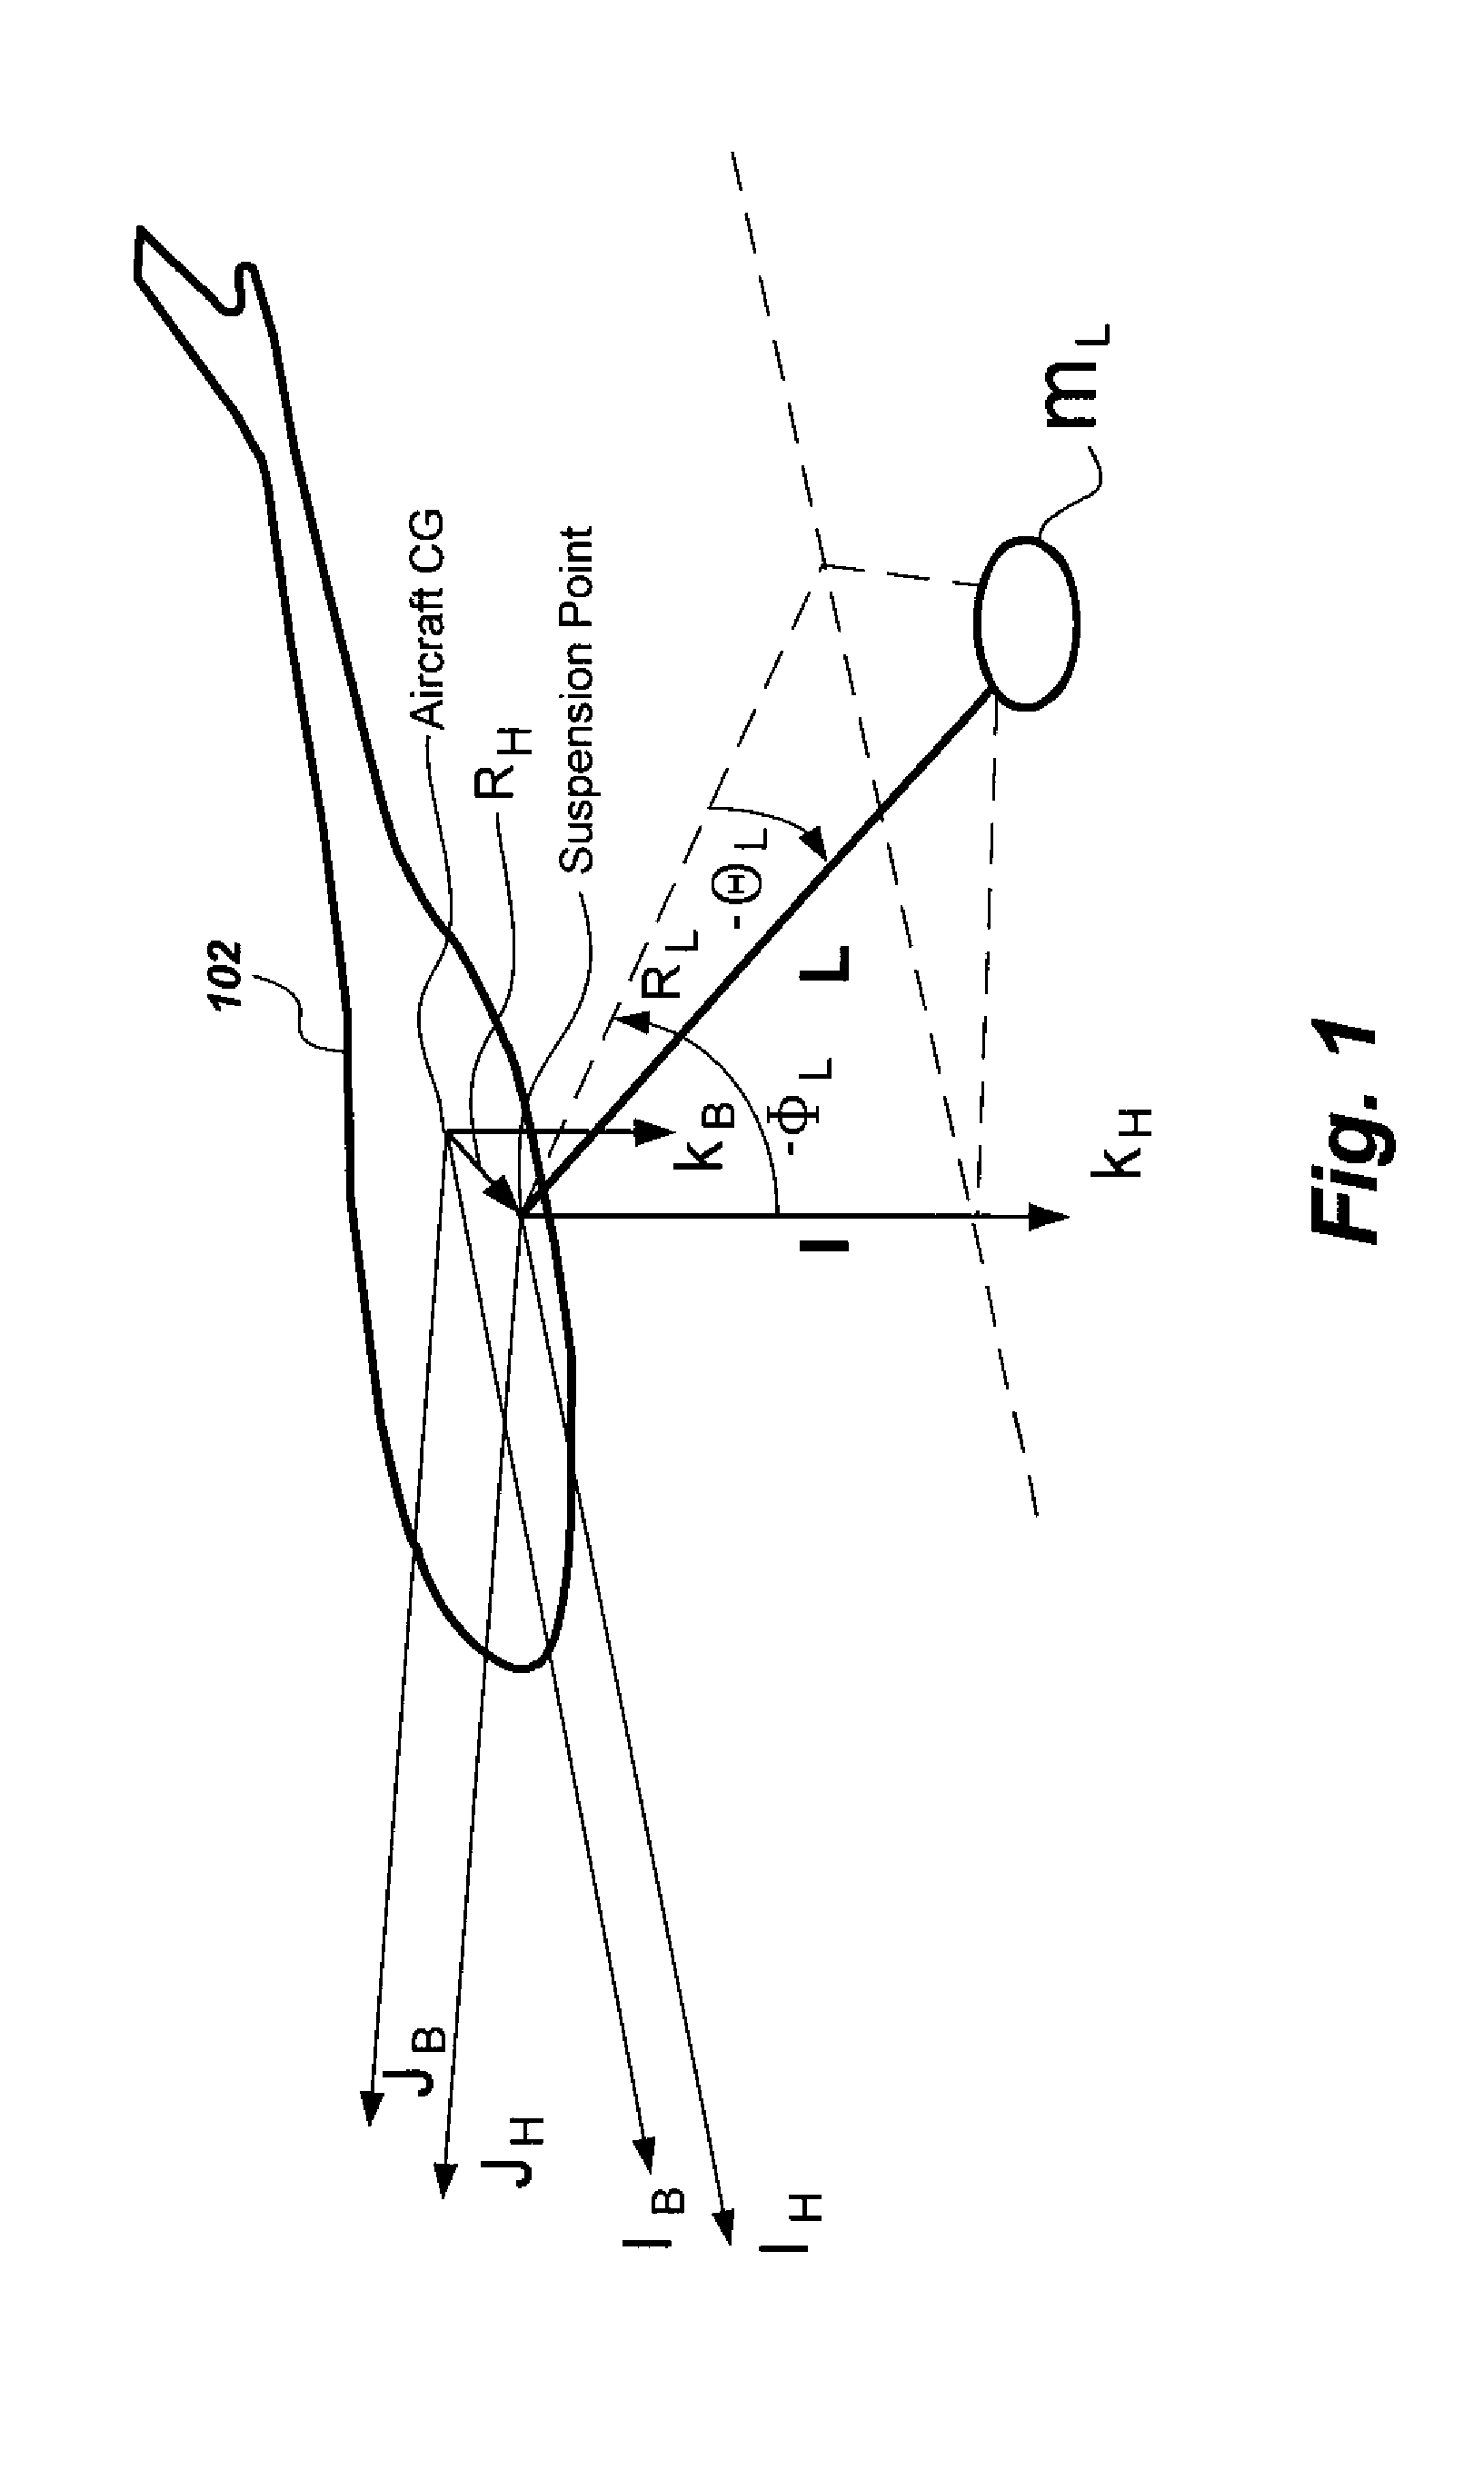 Fuzzy logic-based control method for helicopters carrying suspended loads